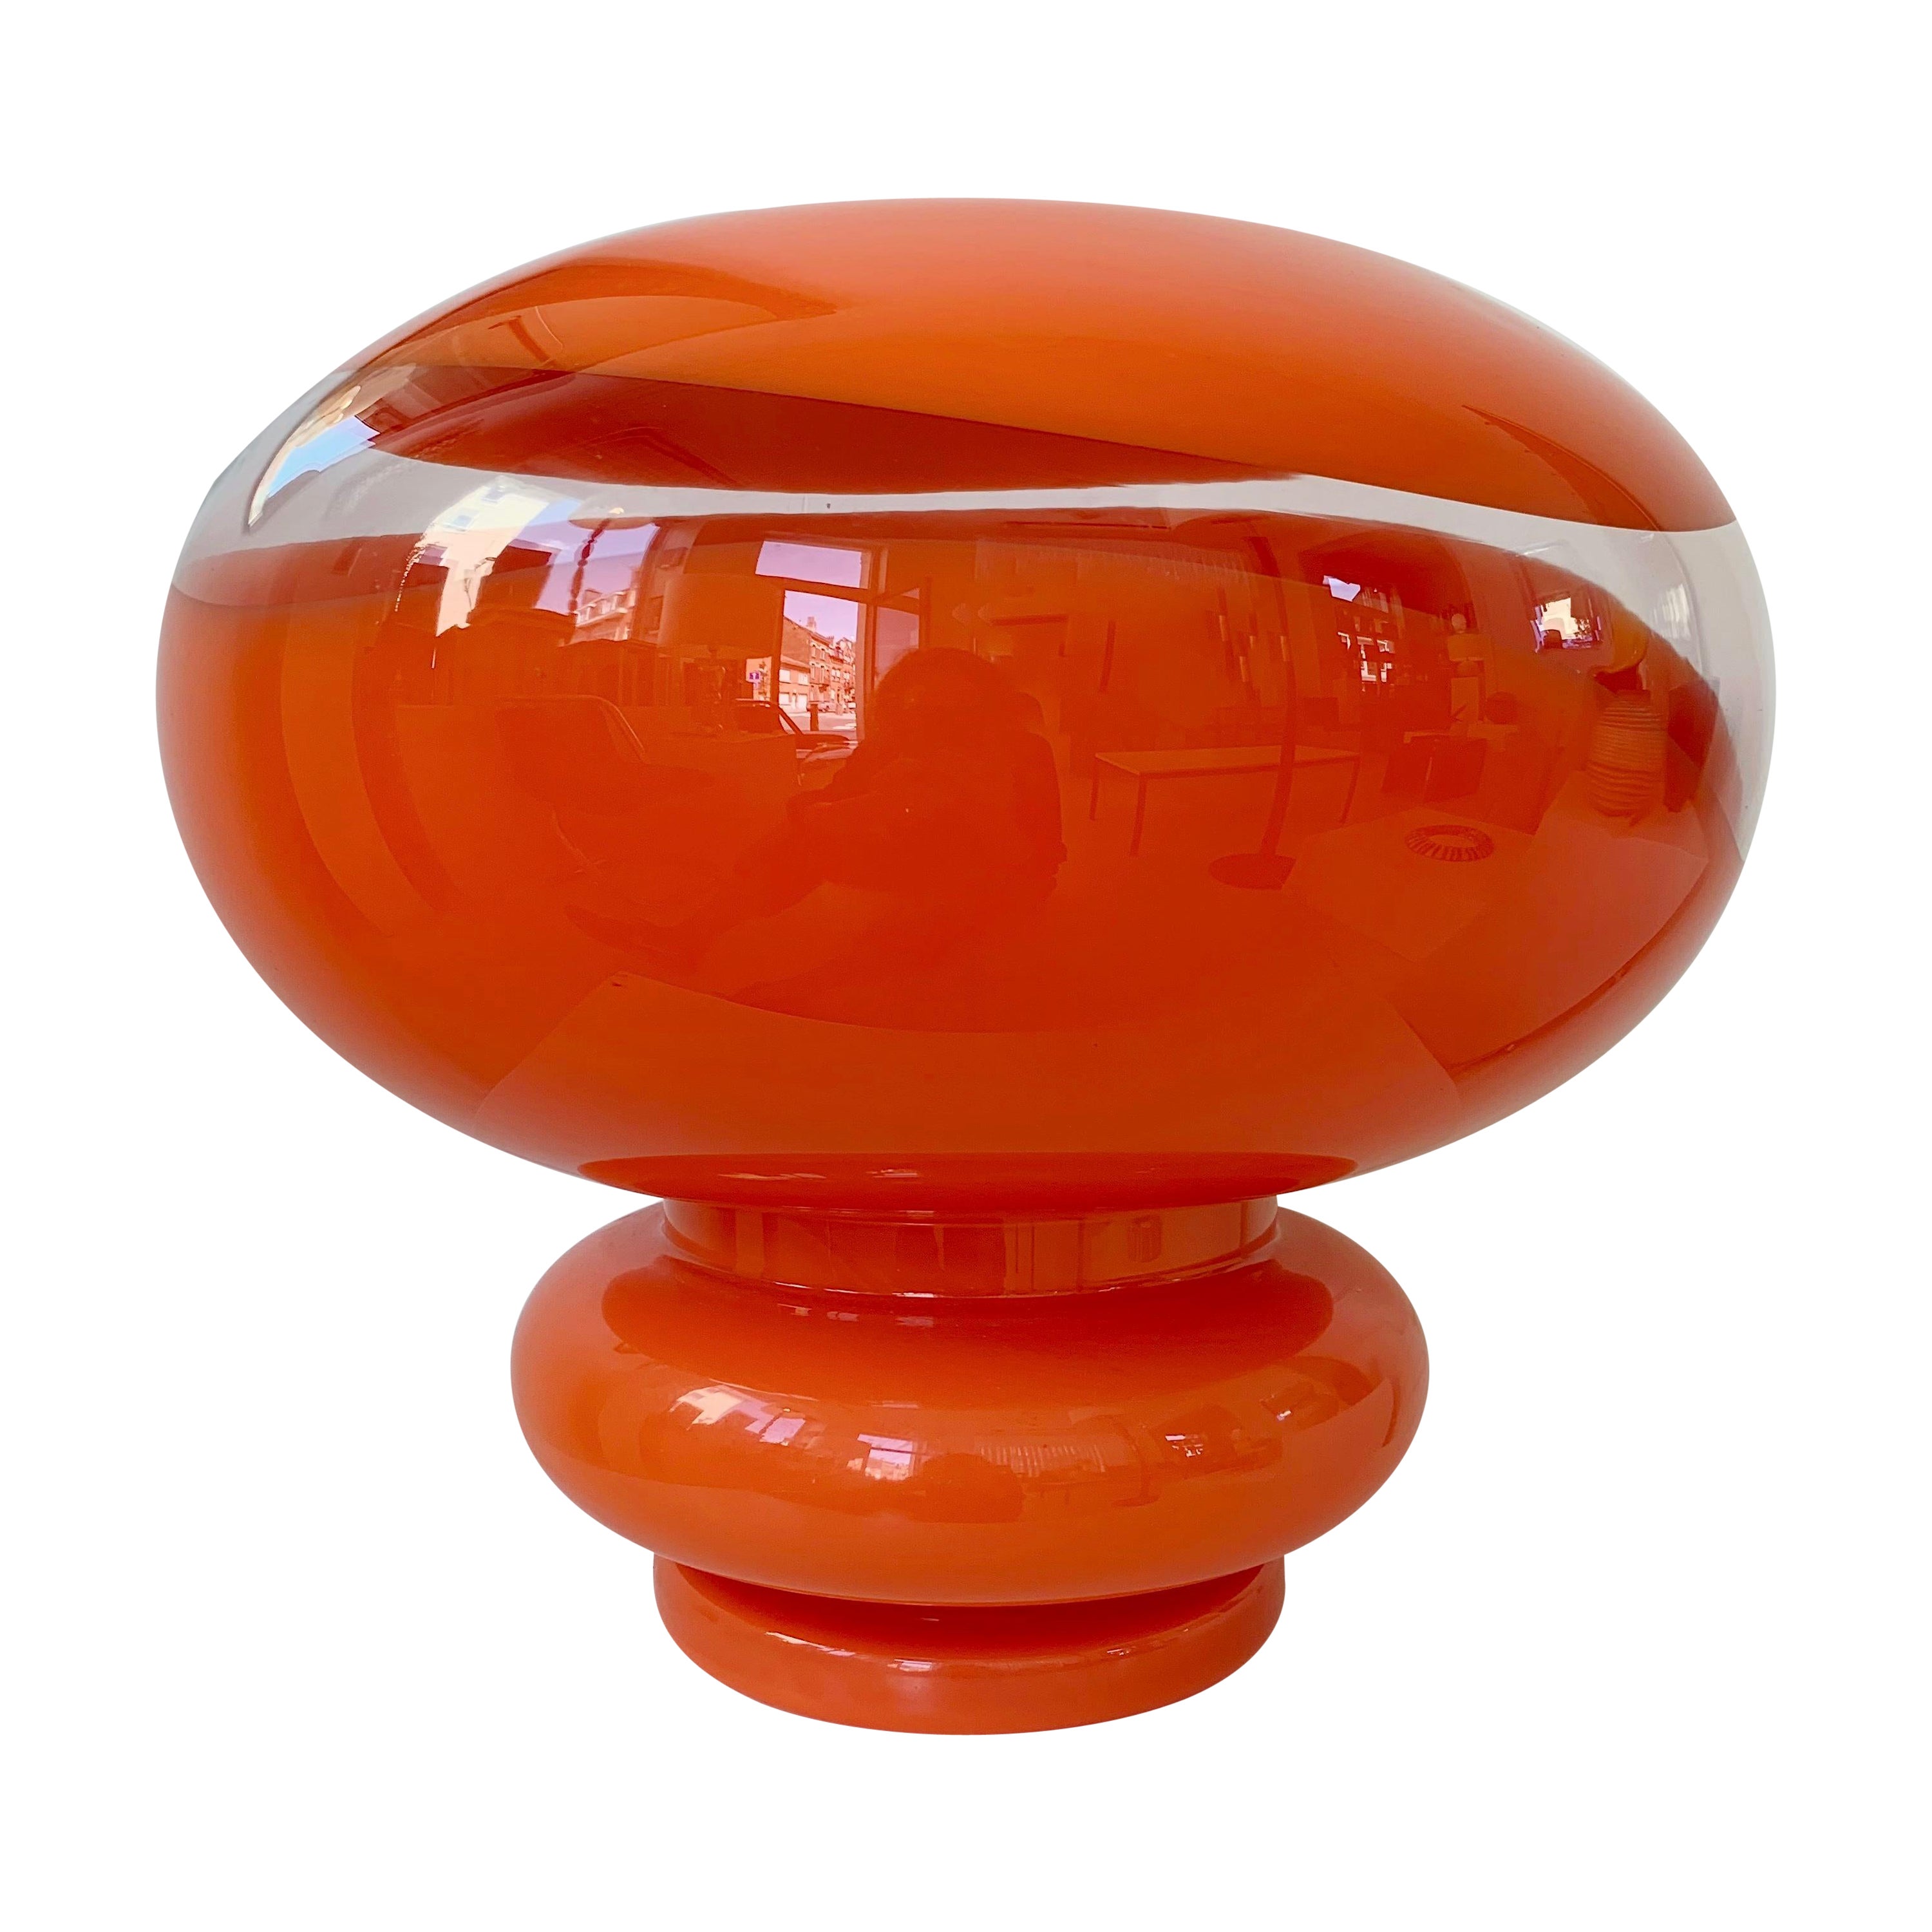 Very beautiful Hiroshima Lamp by Ezio Didone for La Murrina, circa 1960, Italy.
Light red and clear Murano glass. One E27 bulb.
Dimensions: 42 cm diameter, 39 cm H.
Good original condition.
All purchases are covered by our Buyer Protection